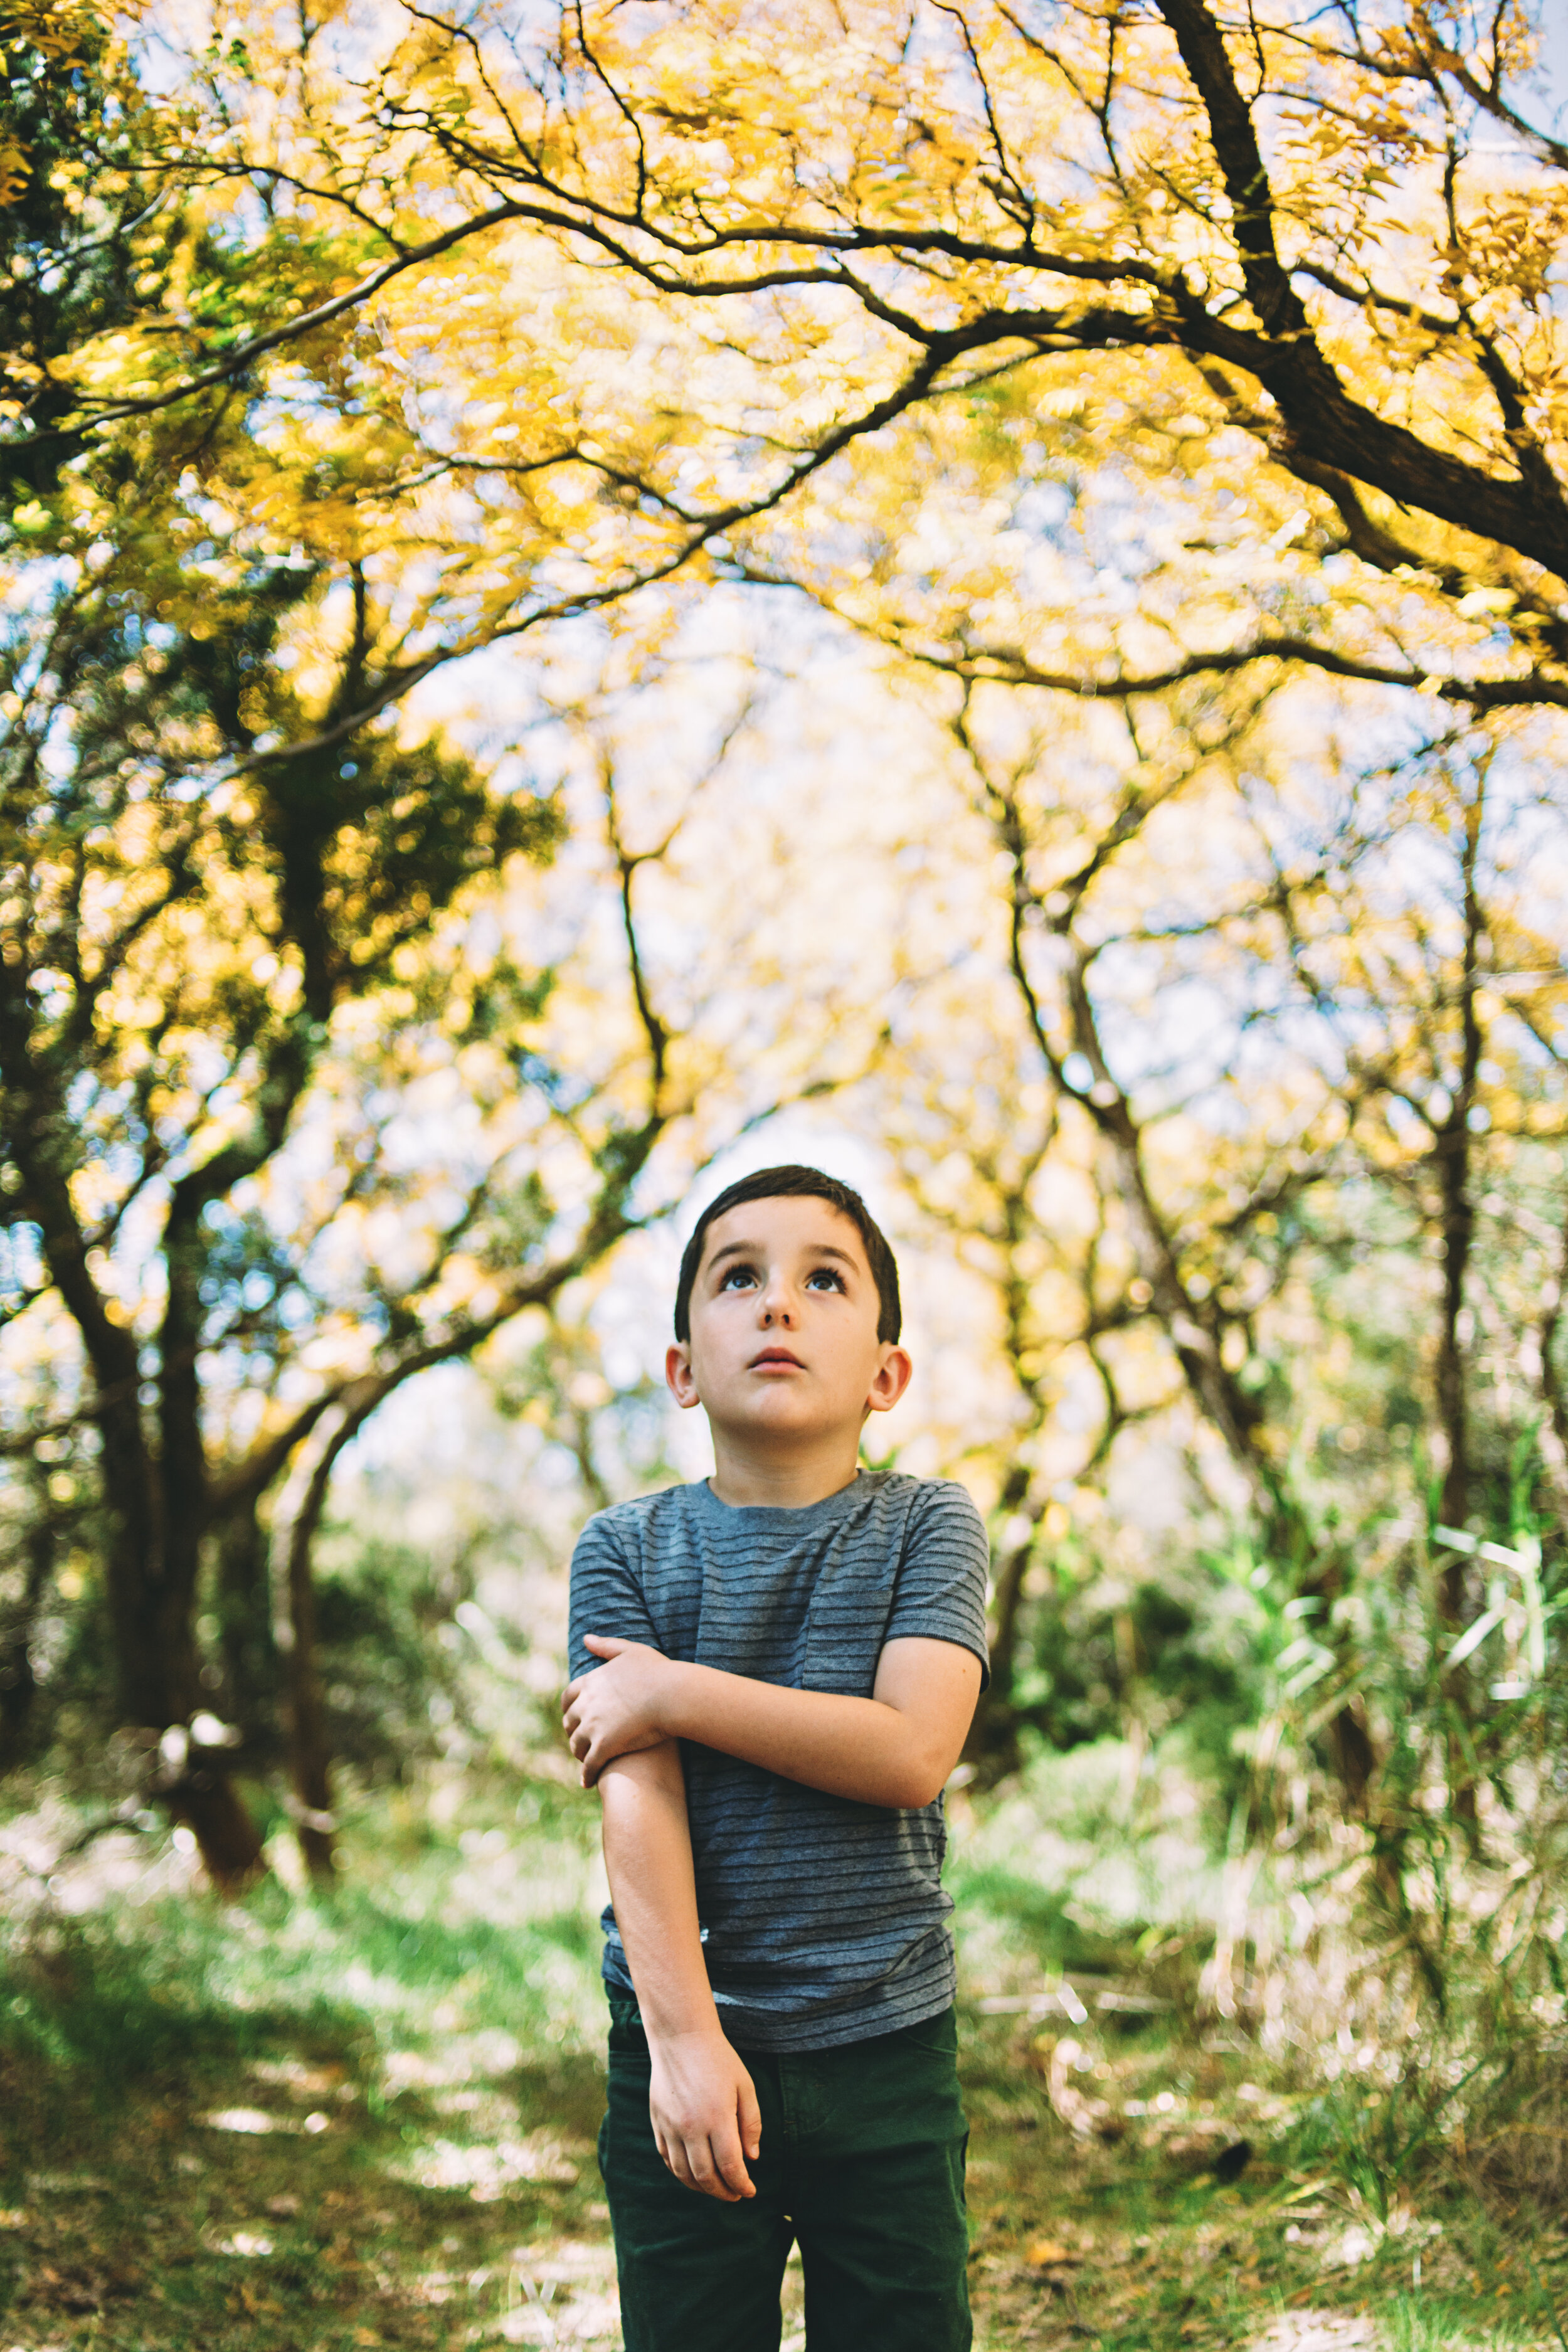  The beautiful combination of green and yellow as the seasons begin to change as a backdrop for this pensive little boy #tealawardphotography #texasfamilyphotographer #amarillophotographer #amarillofamilyphotographer #lifestylephotography #fallphotos #familyphotoshoot #family #lovingsiblings #photographytips #familyphotos #naturalfamilyinteraction 